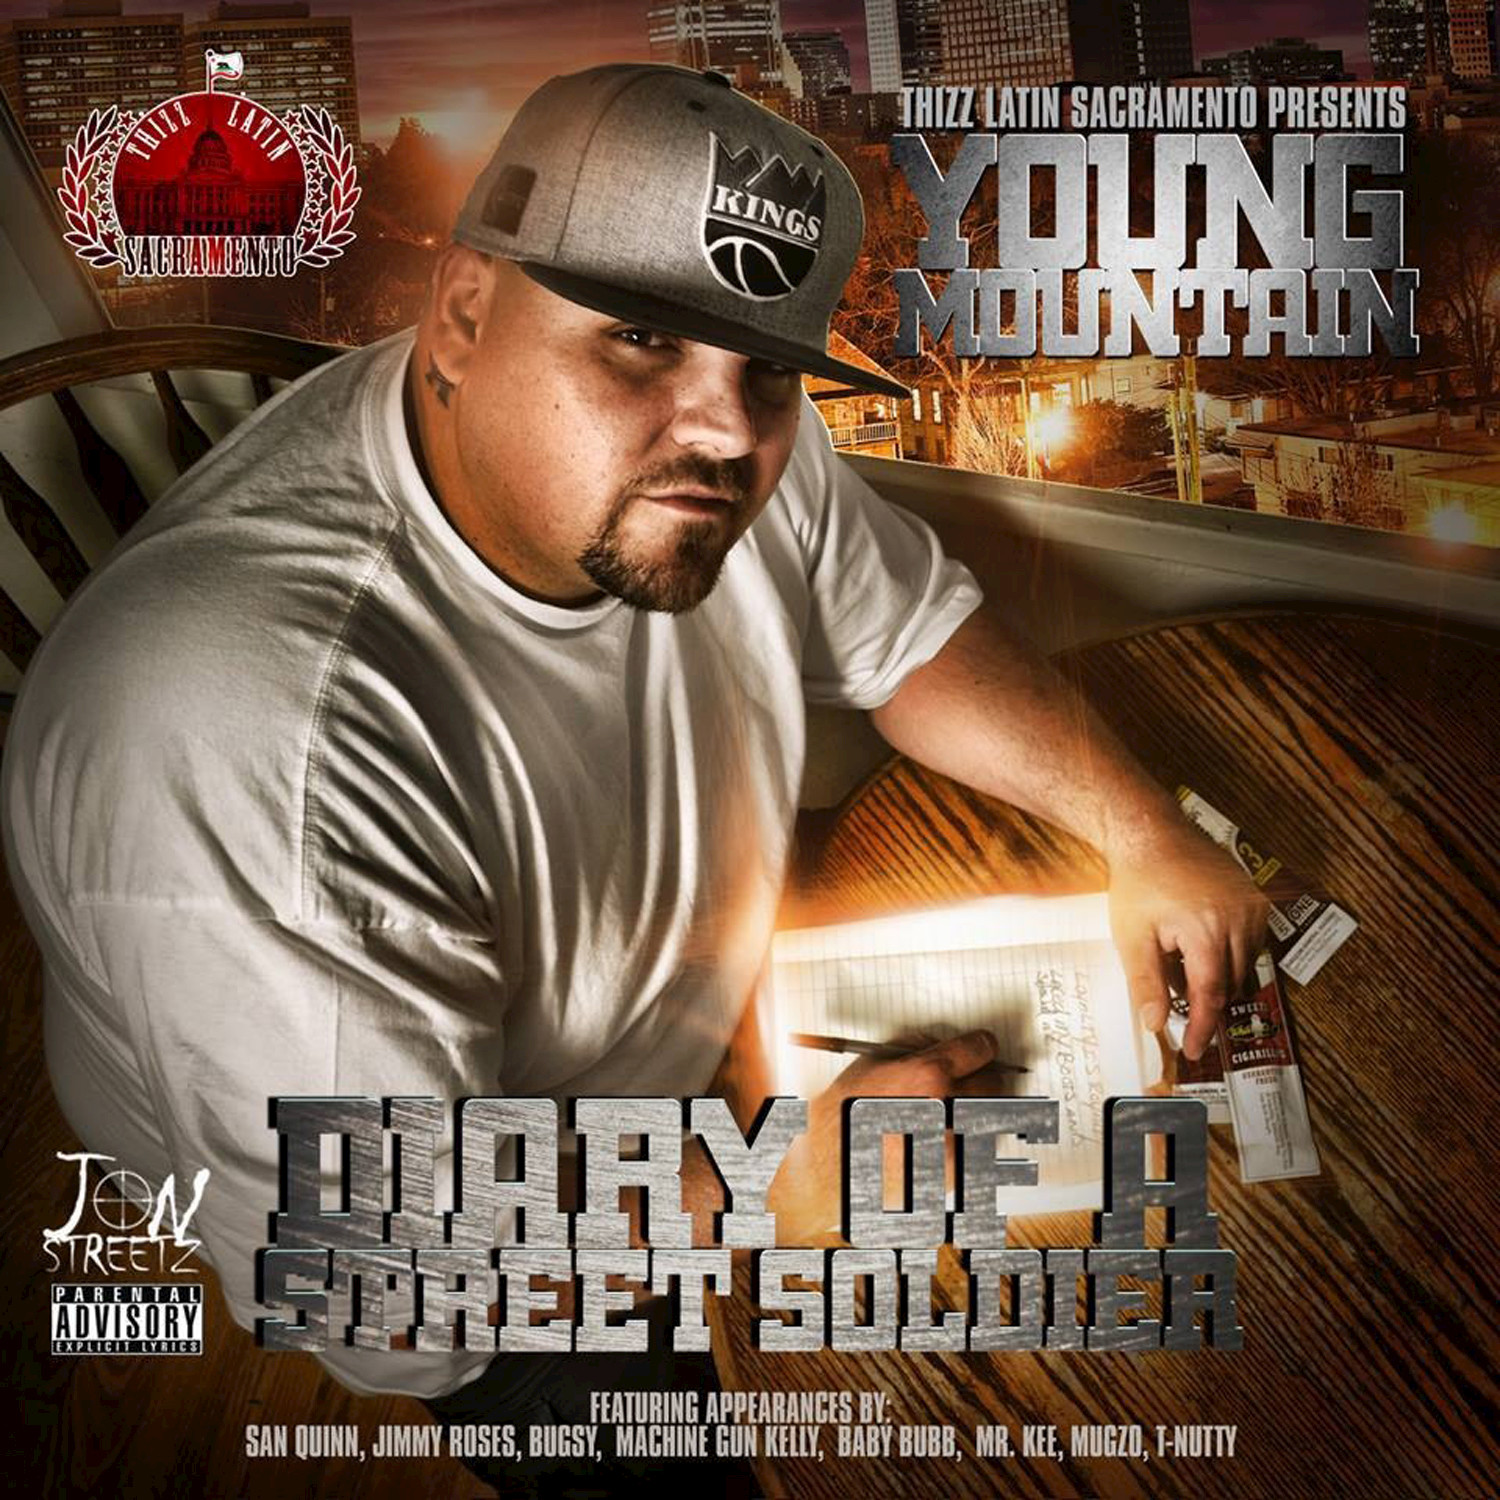 Diary of a Street Soldier (Deluxe Edition)